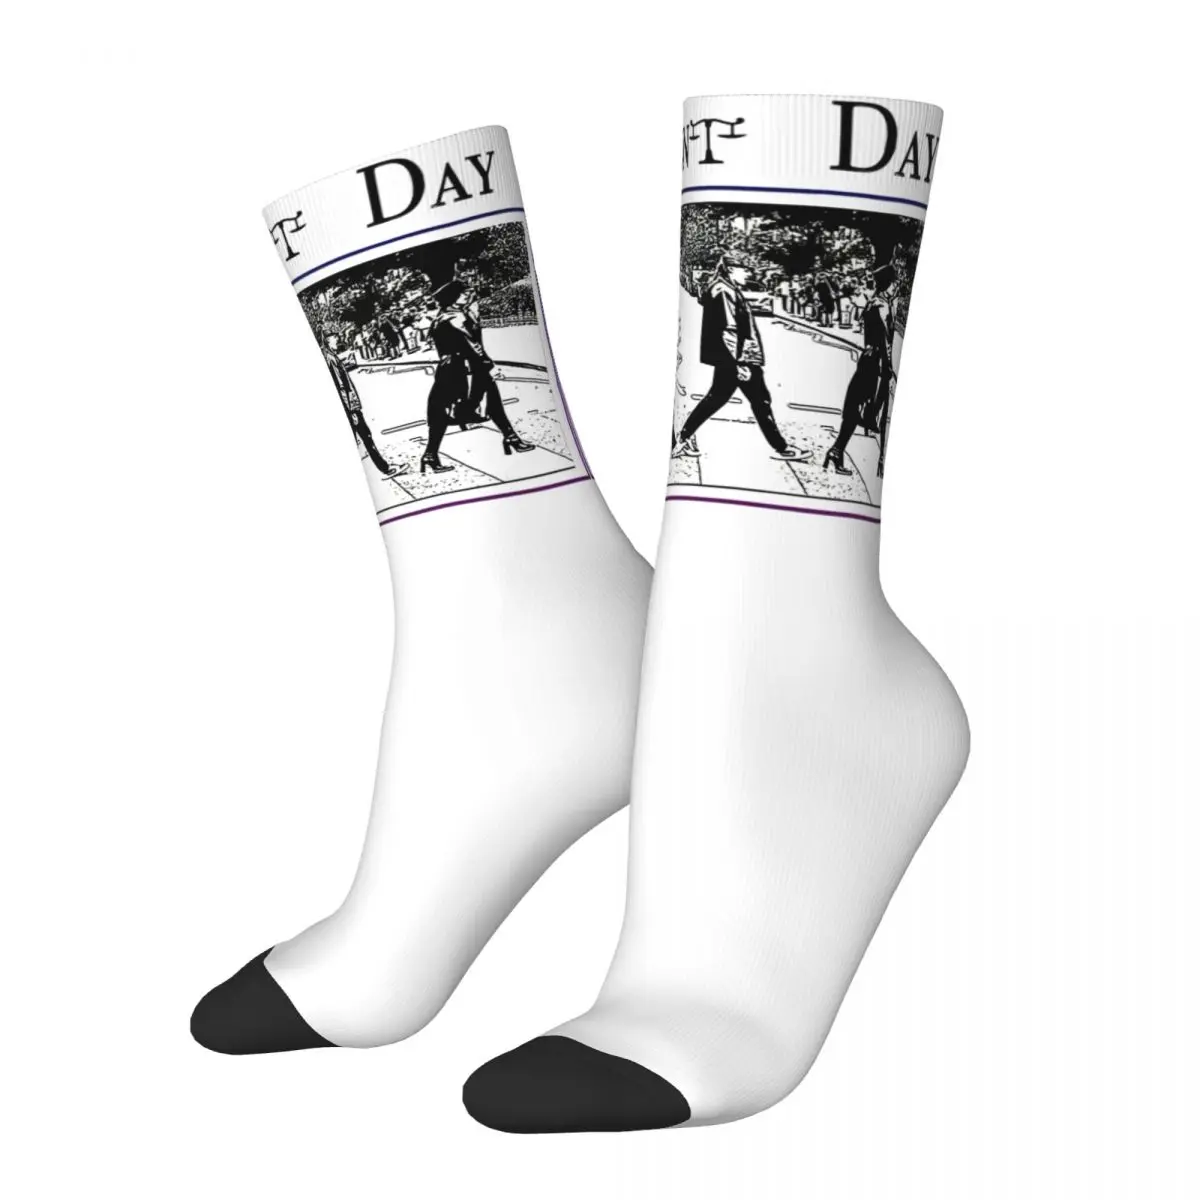 

Rhea Riple Judgment Day On Abbey Road Theme Design Socks Merch for Female Sweat Absorbing Stockings